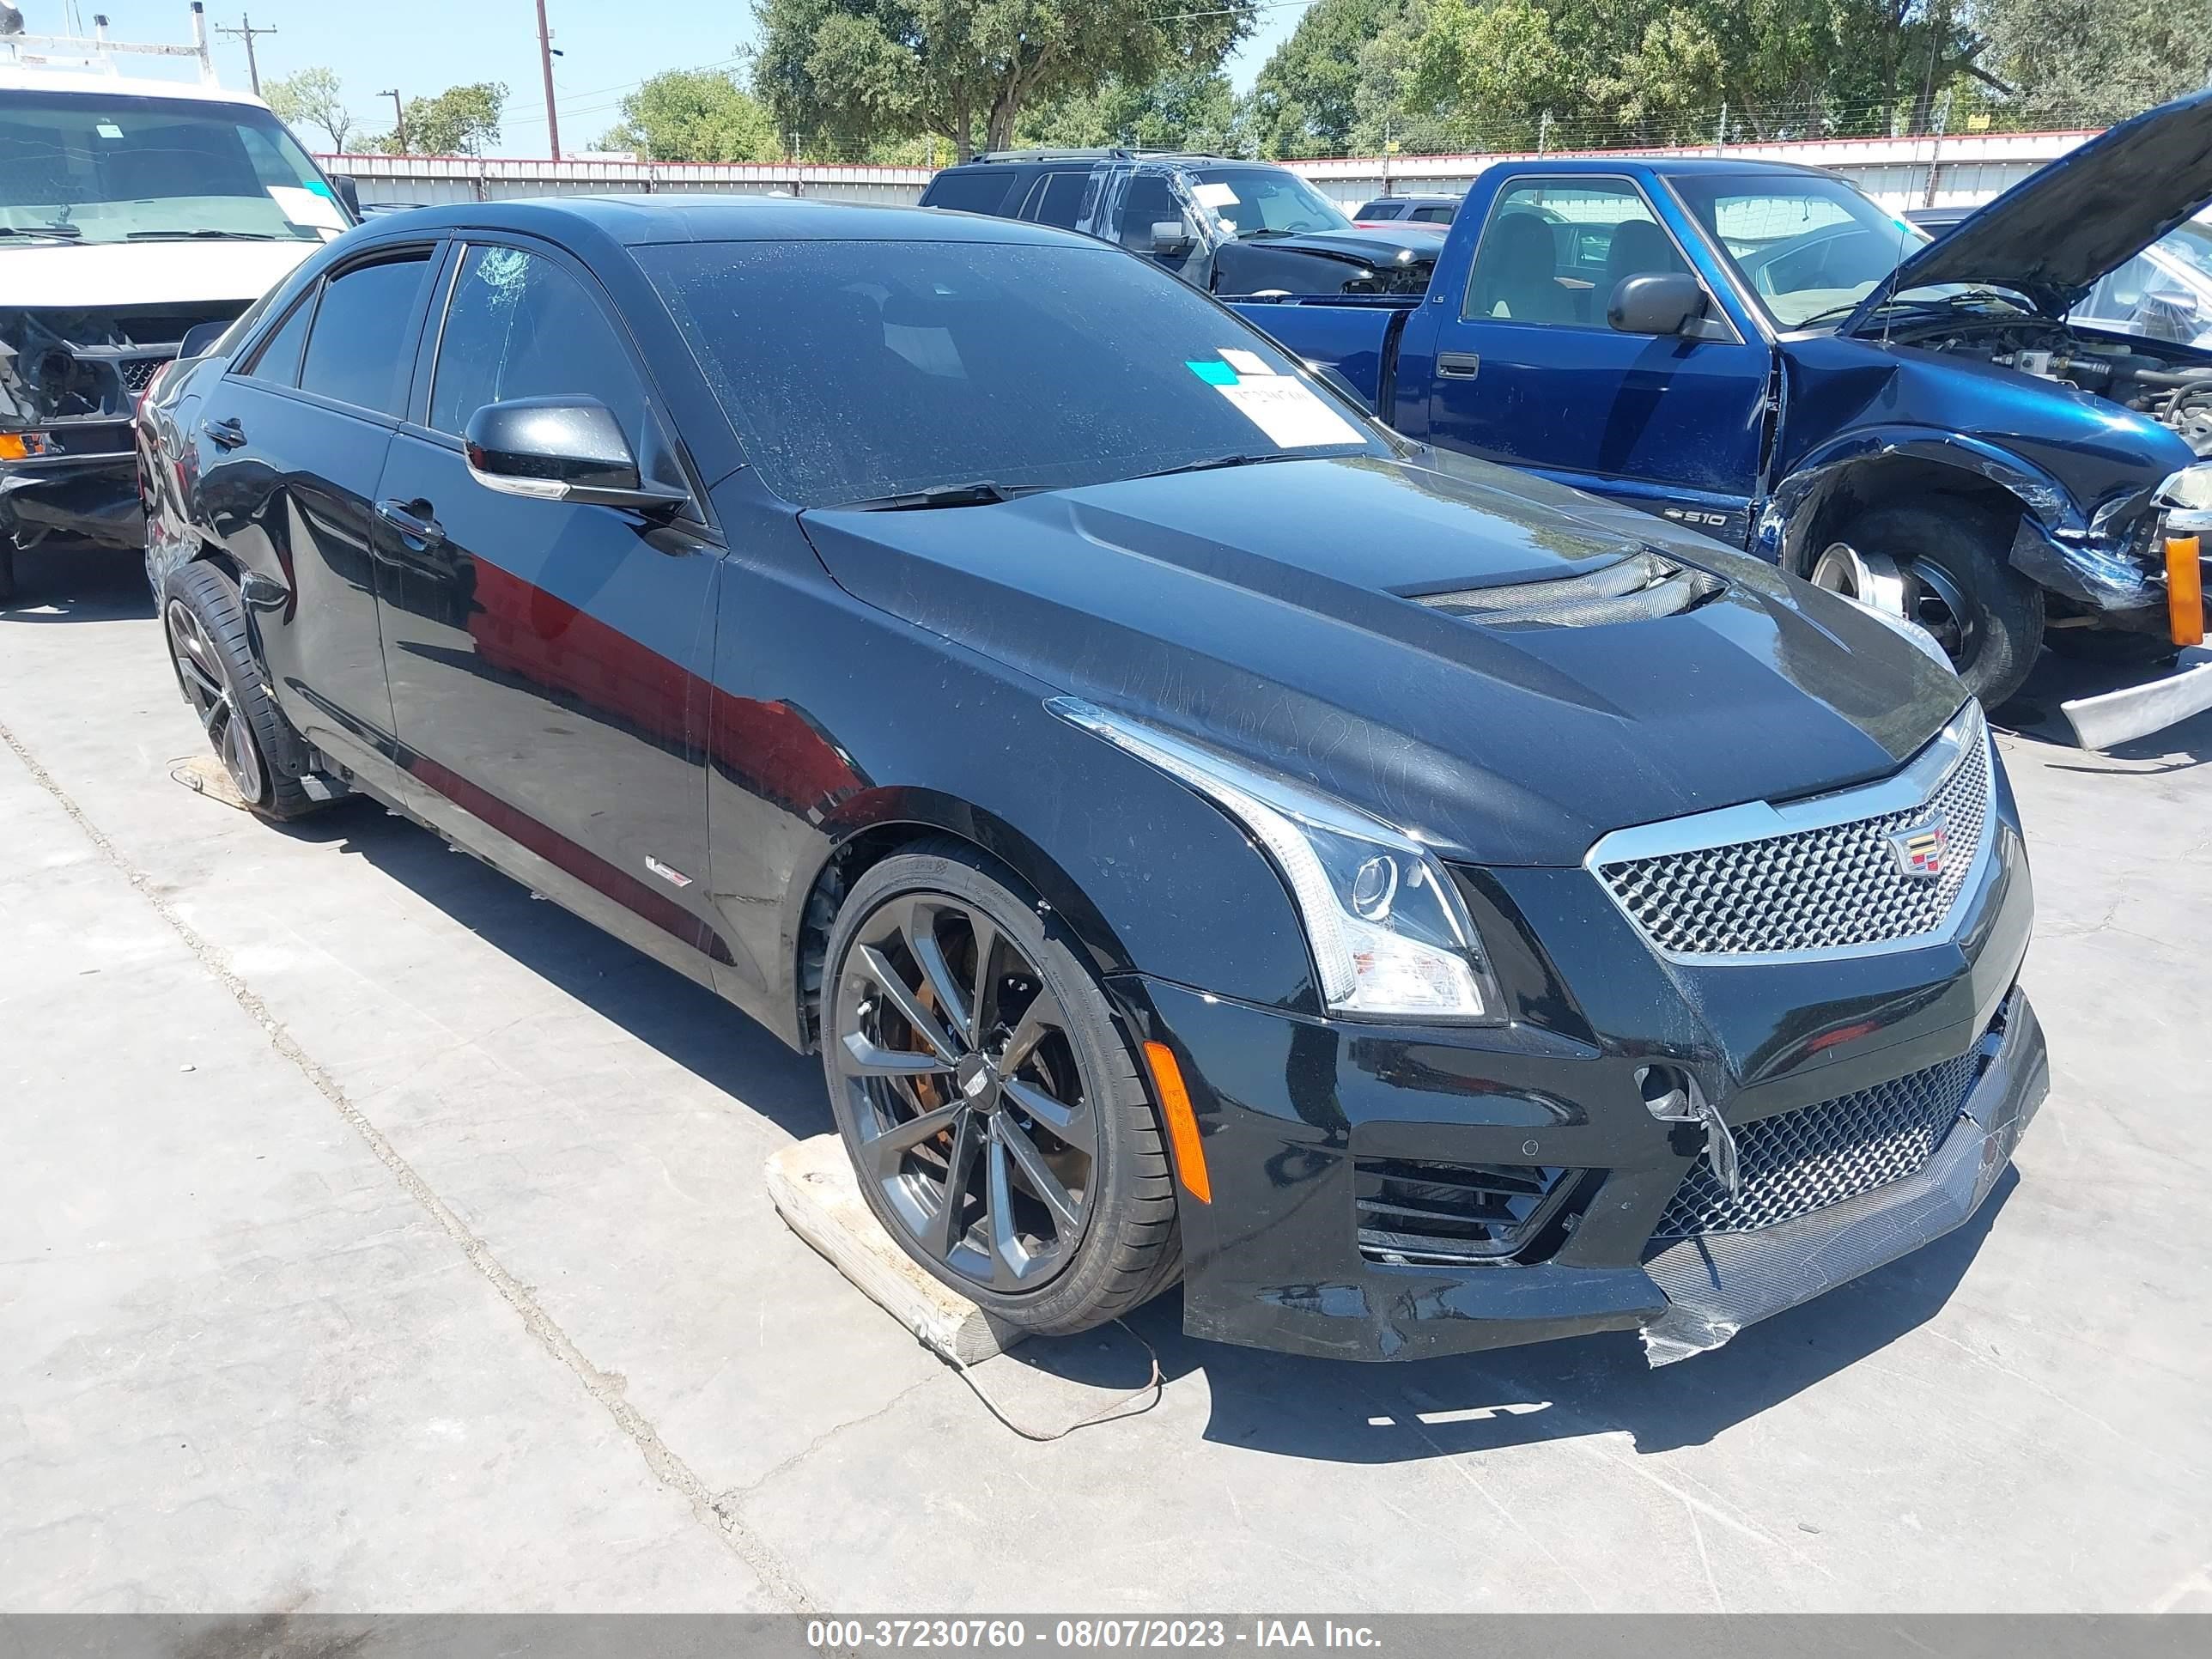 vin: 1G6AN5SY7G0106433 1G6AN5SY7G0106433 2016 cadillac ats-v 3600 for Sale in 78616, 2191 Highway 21 West, Dale, Texas, USA